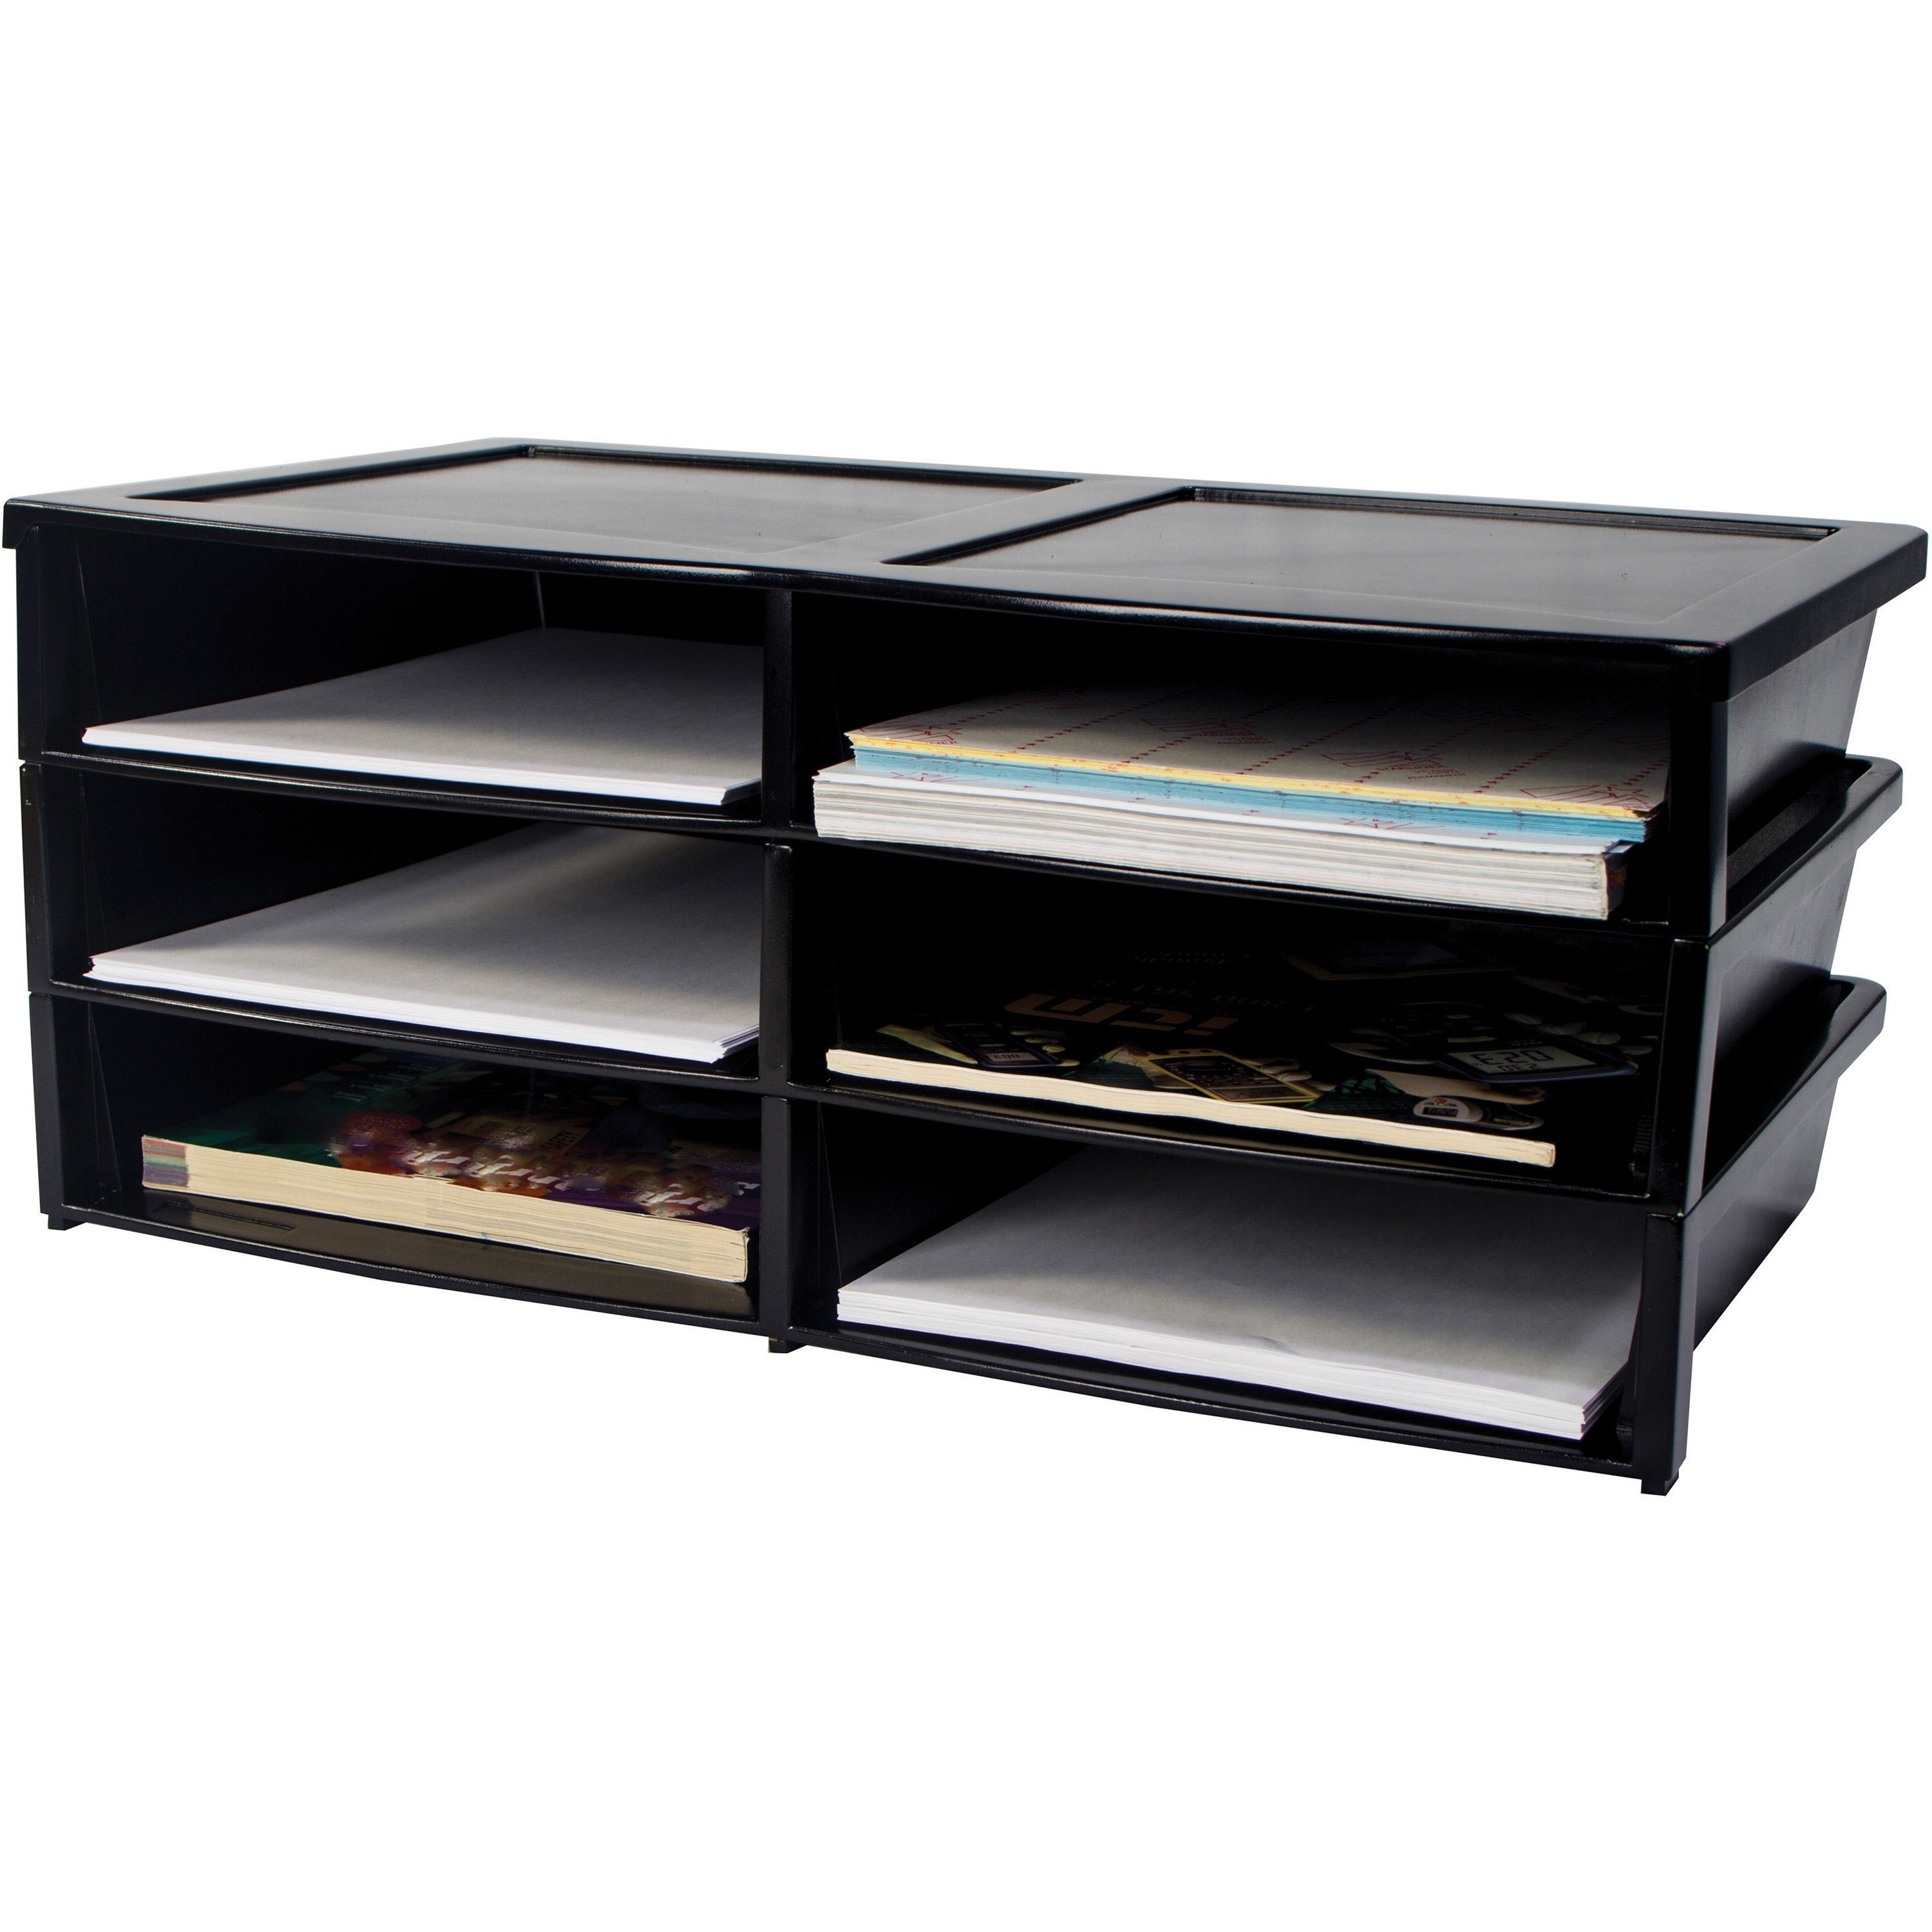 storex-quick-stack-6-sorter-organizer-500-x-sheet-6-compartments-compartment-size-875-x-1150-x-2-87-height-x-136-width205-length-black-plastic-1-each_stx61446e01c - 1